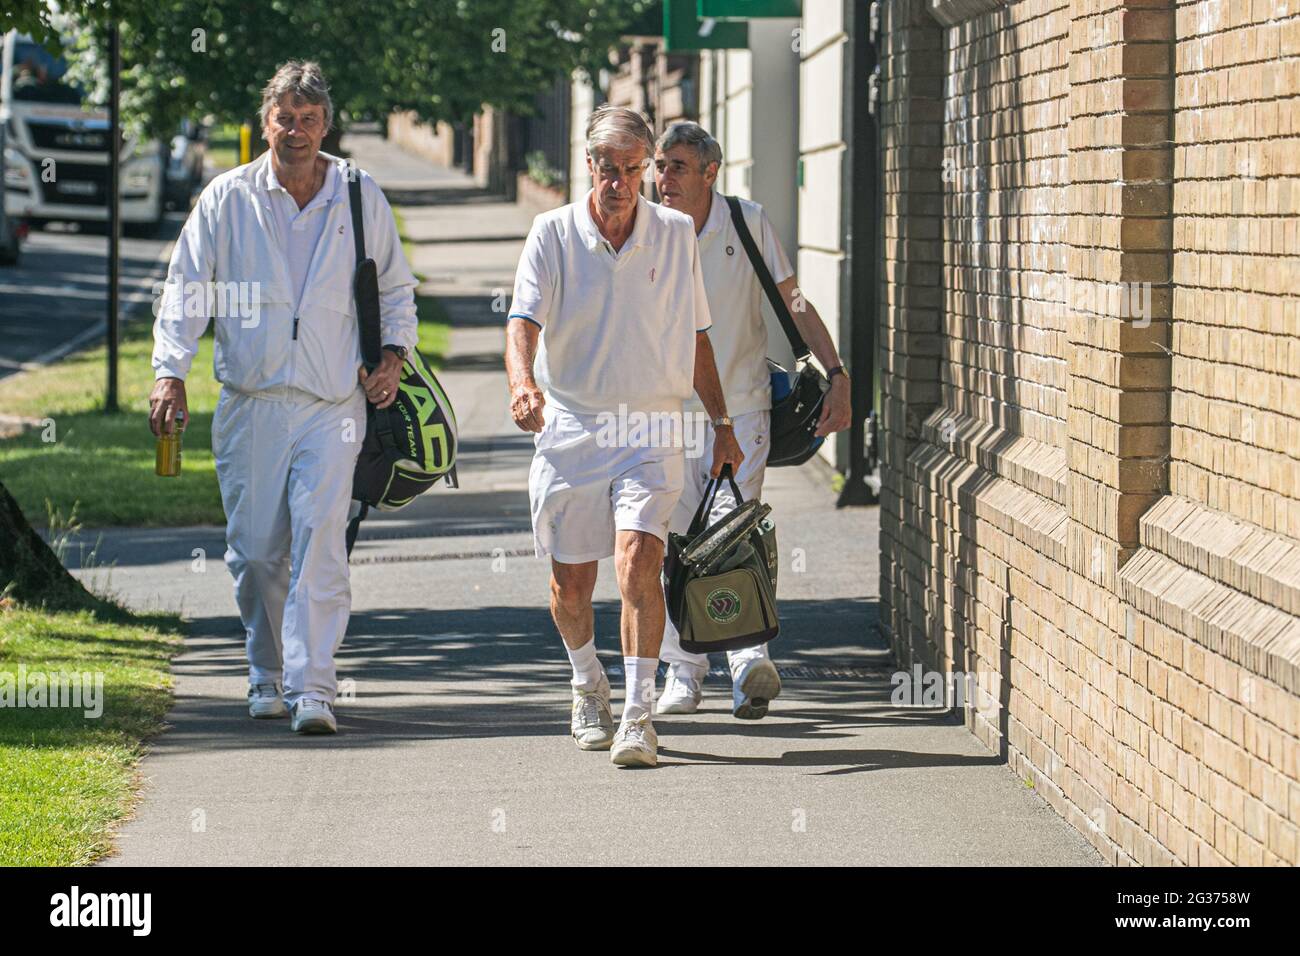 WIMBLEDON LONDON 14 June 2021. Former CEO Chris Gorringe (C) arrives with club  members for practice at the All England Lawn Tennis & Croquet Club which is  prepararing to host the championships .